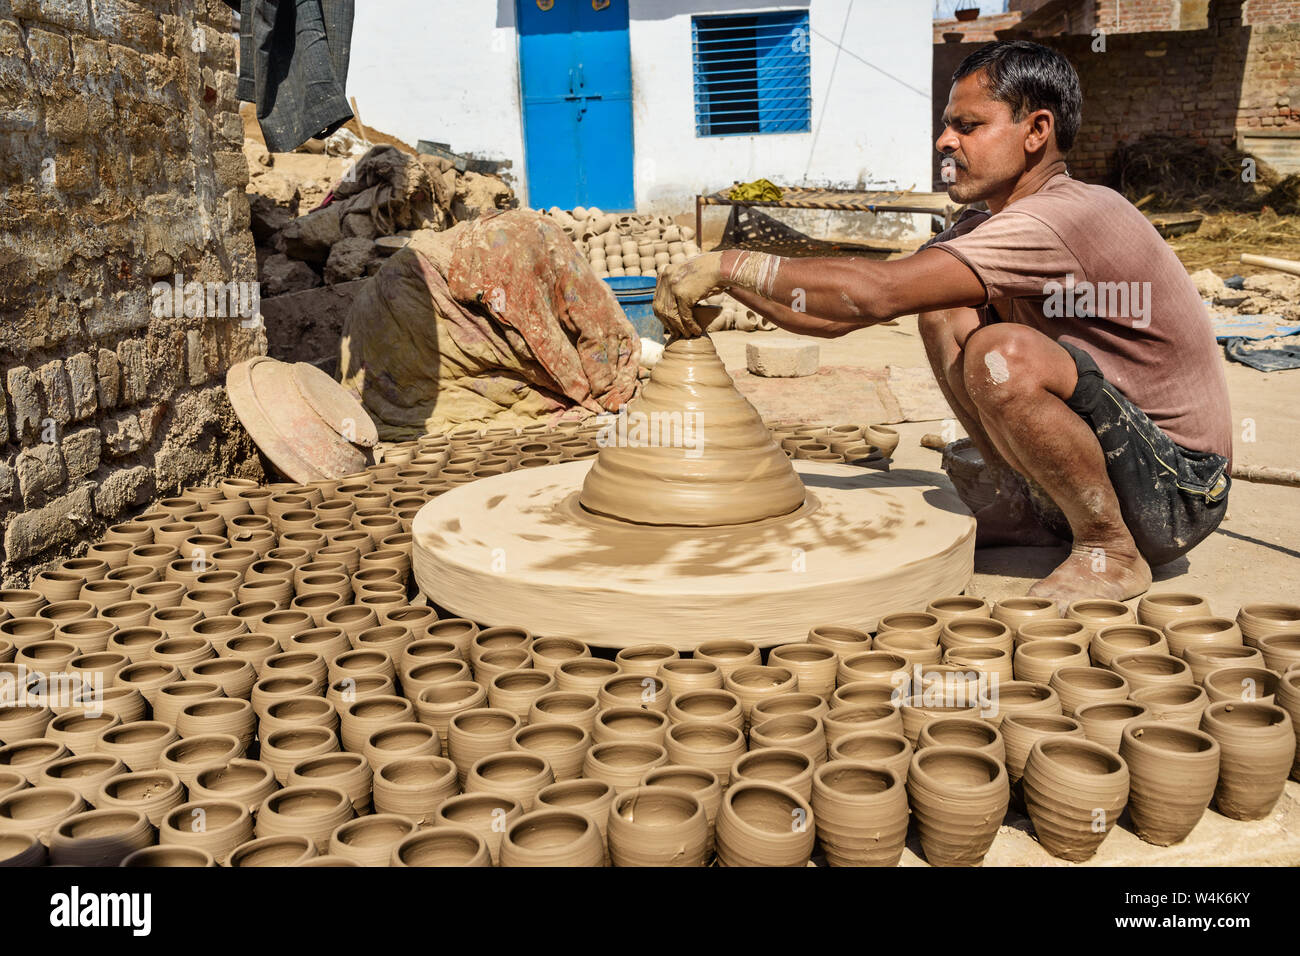 Indian Potter Photos and Images & Pictures